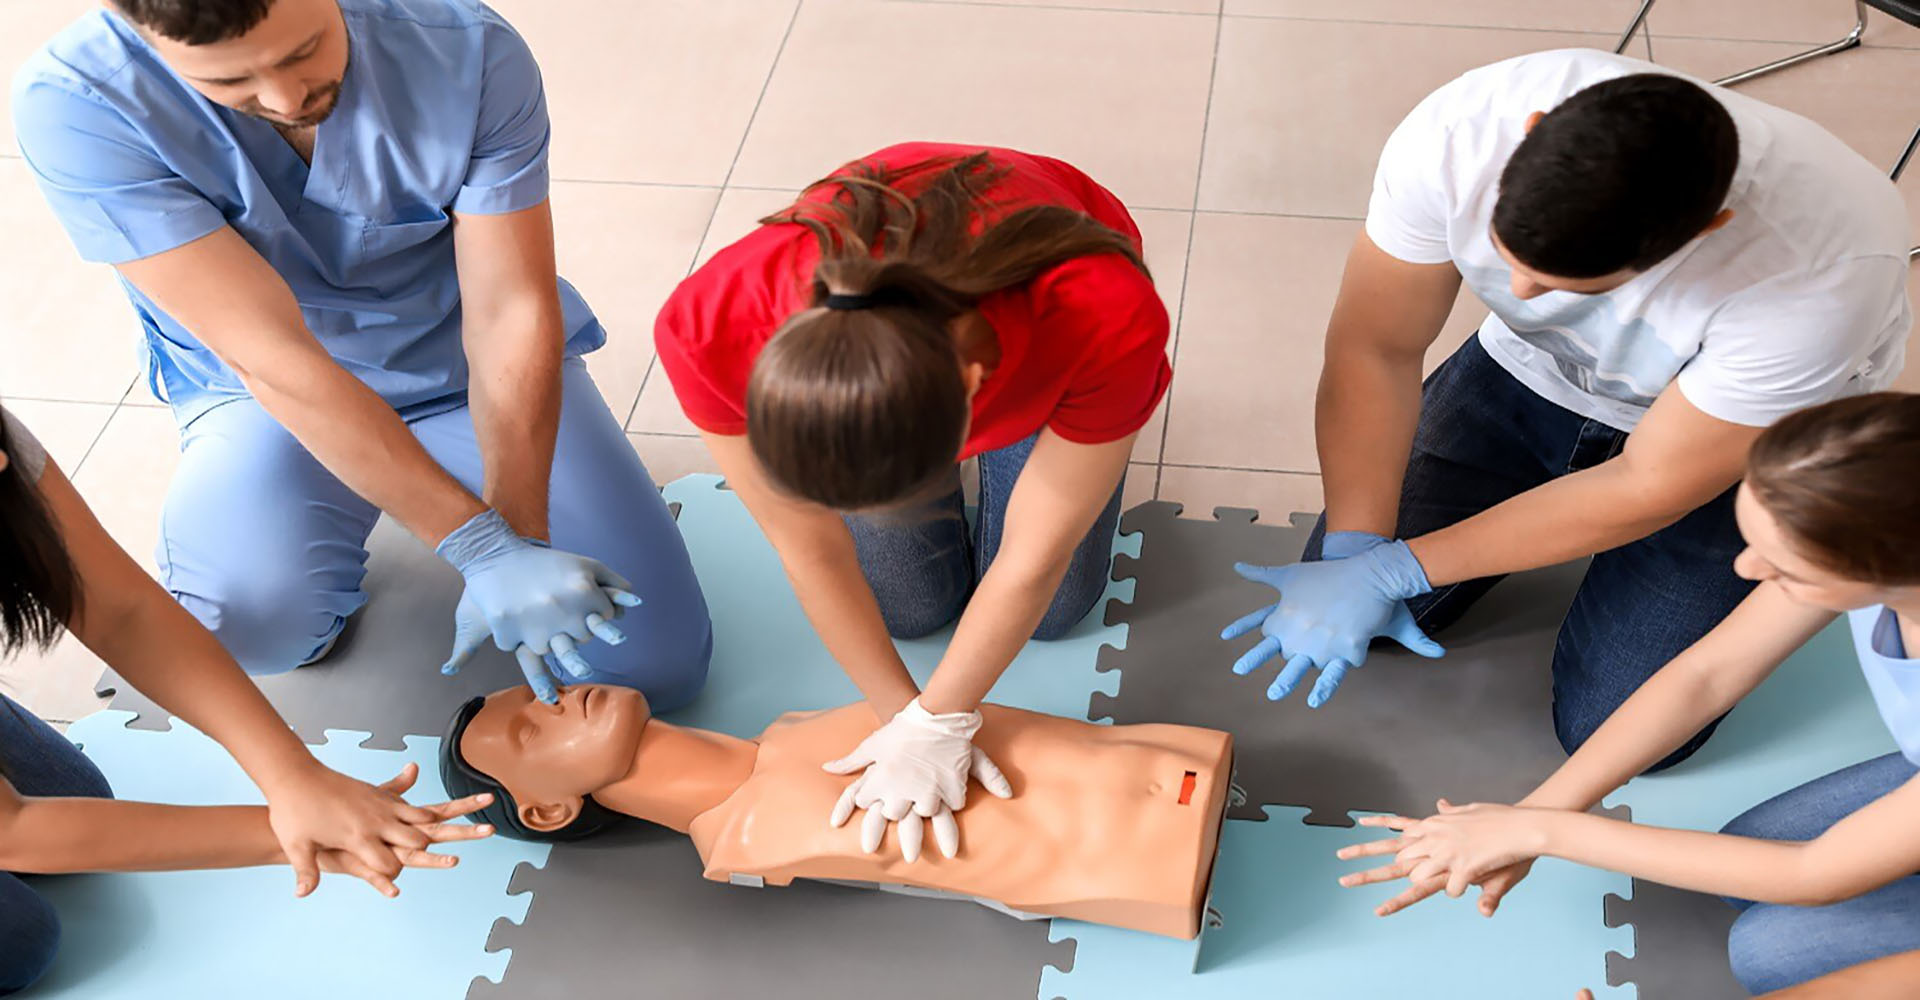 1649929942-first+aid+courses+in+hong+kong.jpg